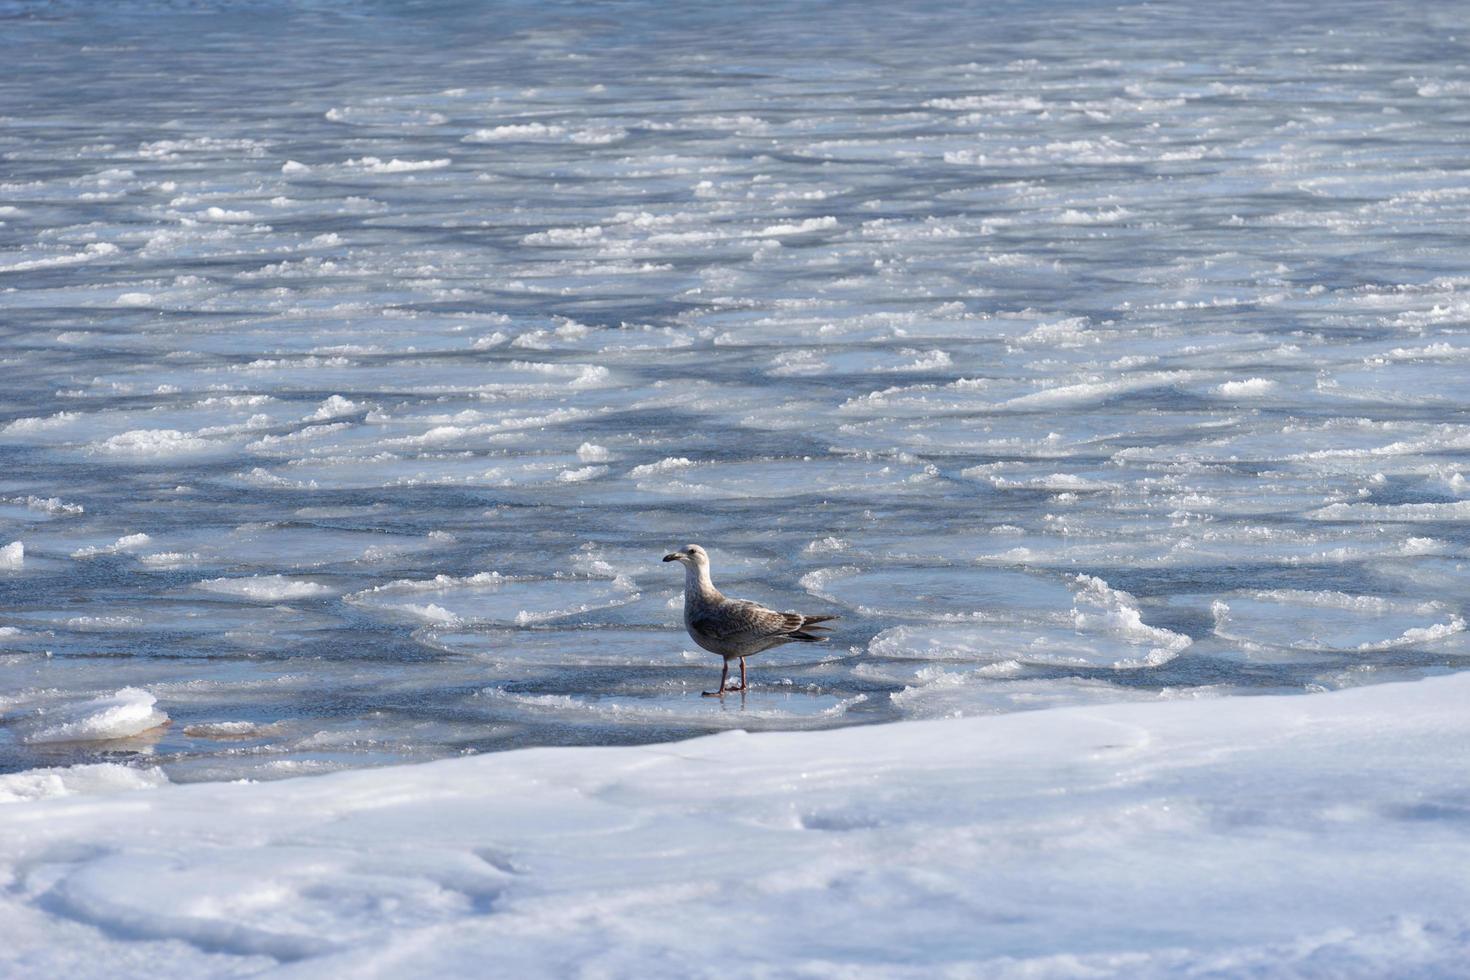 Seascape with a Seagull on the frozen surface of the sea photo